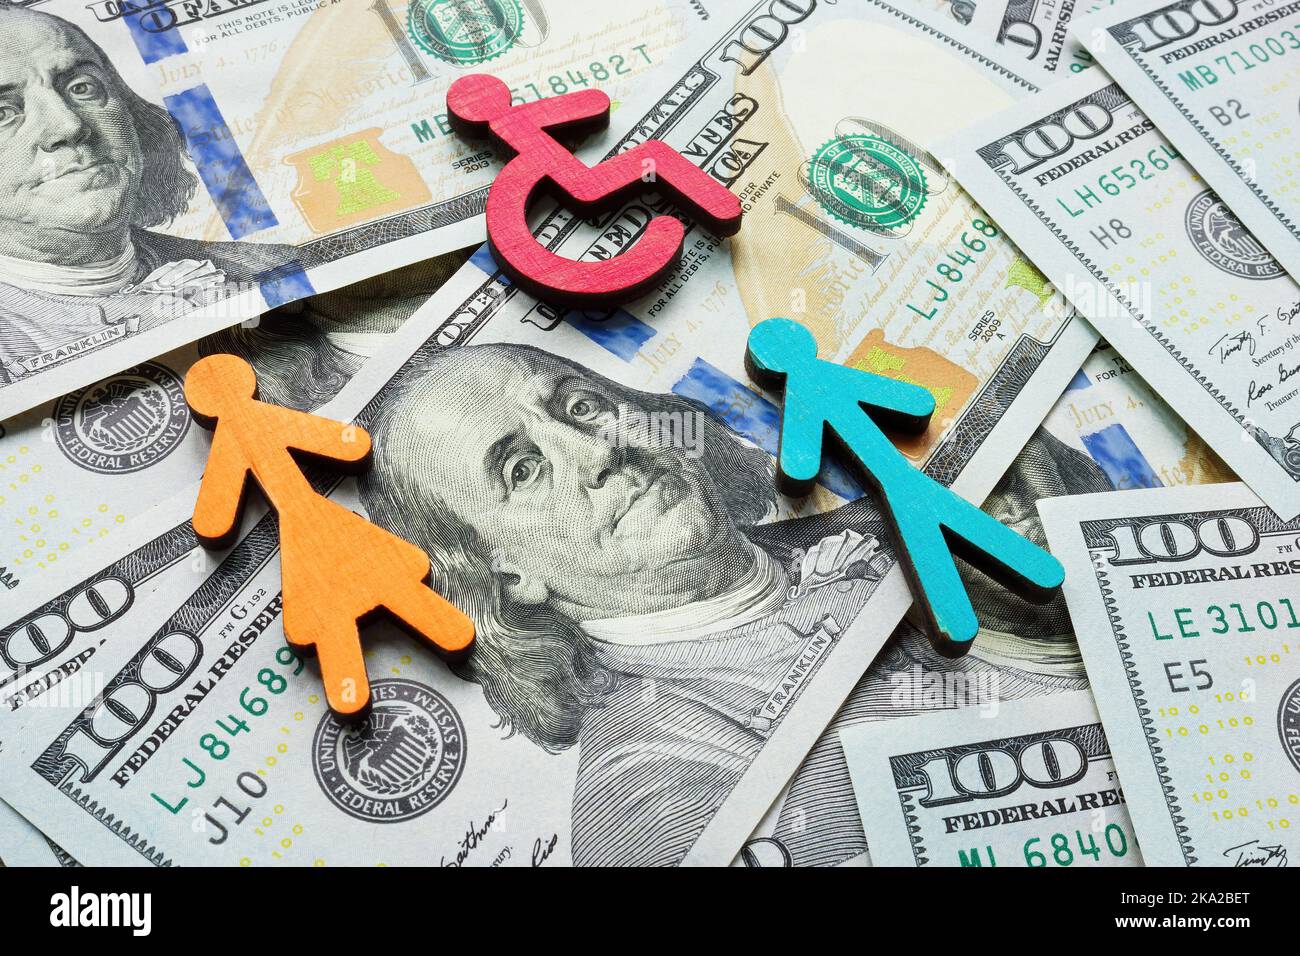 Money and figures on them as a symbol of income inequality and wage gap. Stock Photo